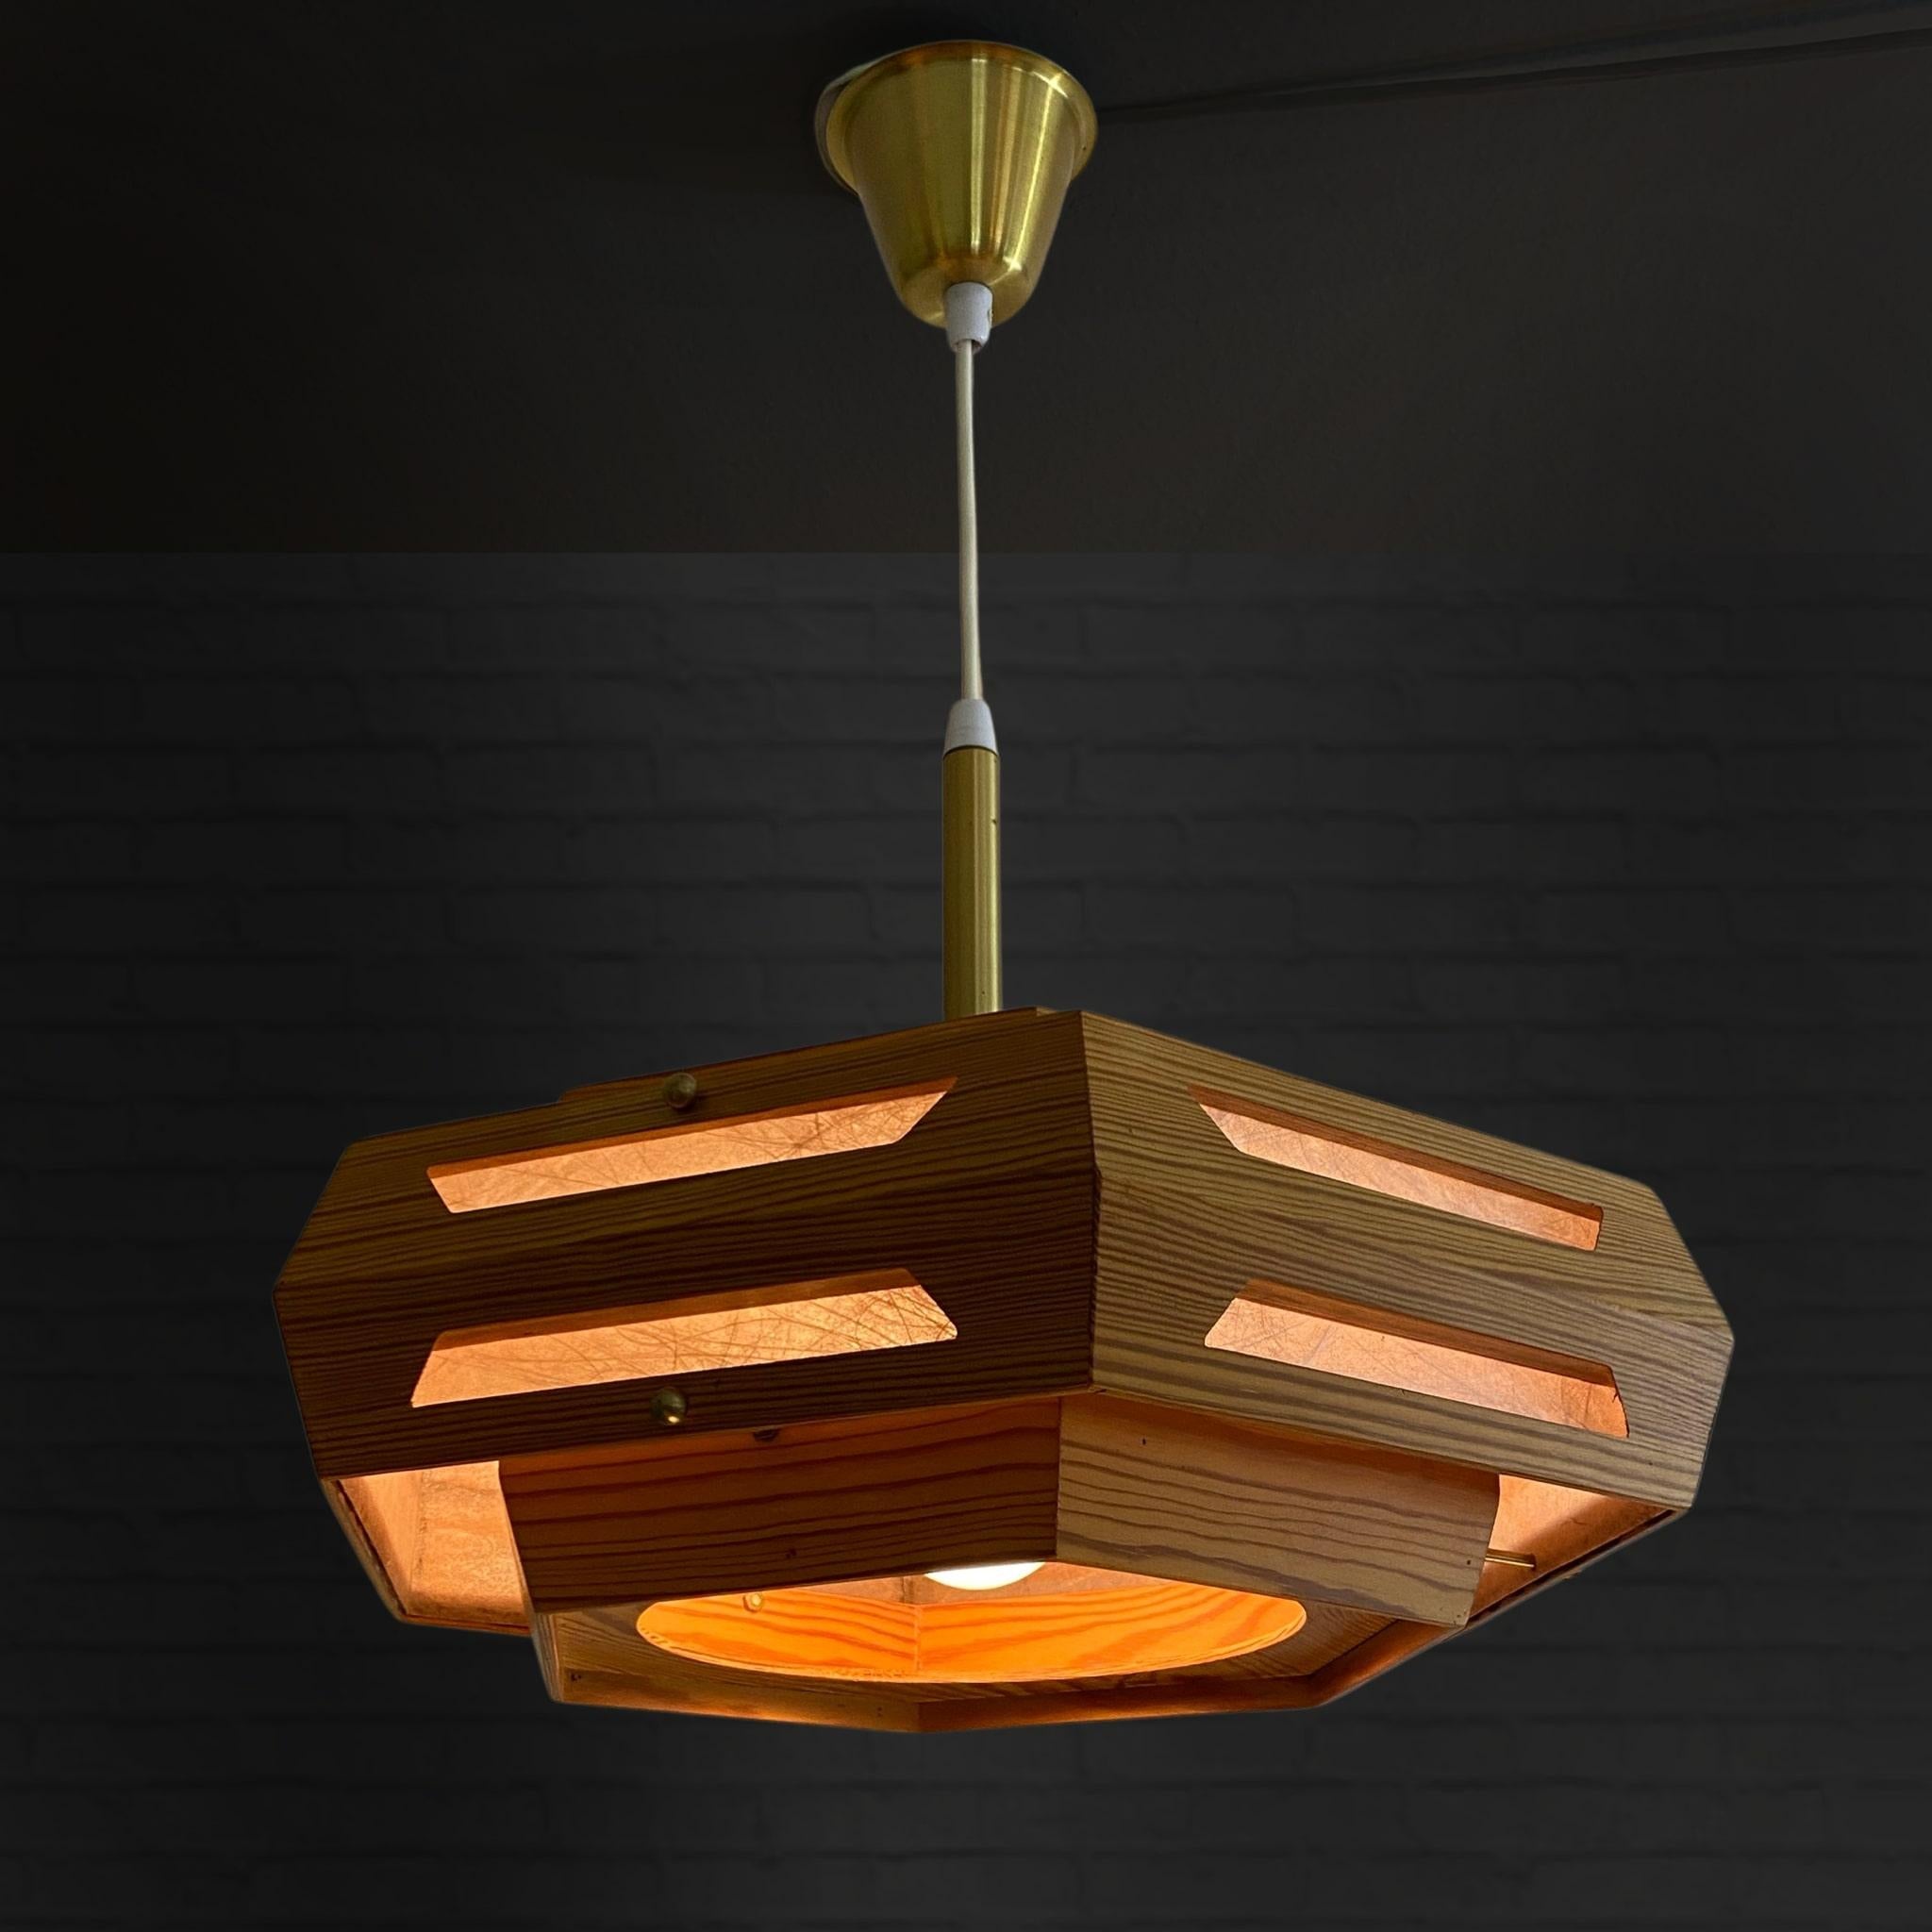 Swedish 1970s rustic pendant lamp made from solid pinewood with brass fittings. Thin glass fiber sheets act as reflectors, giving a soft and pleasant light without glare. Complete with a matching brass canopy at the ceiling. In the manner of